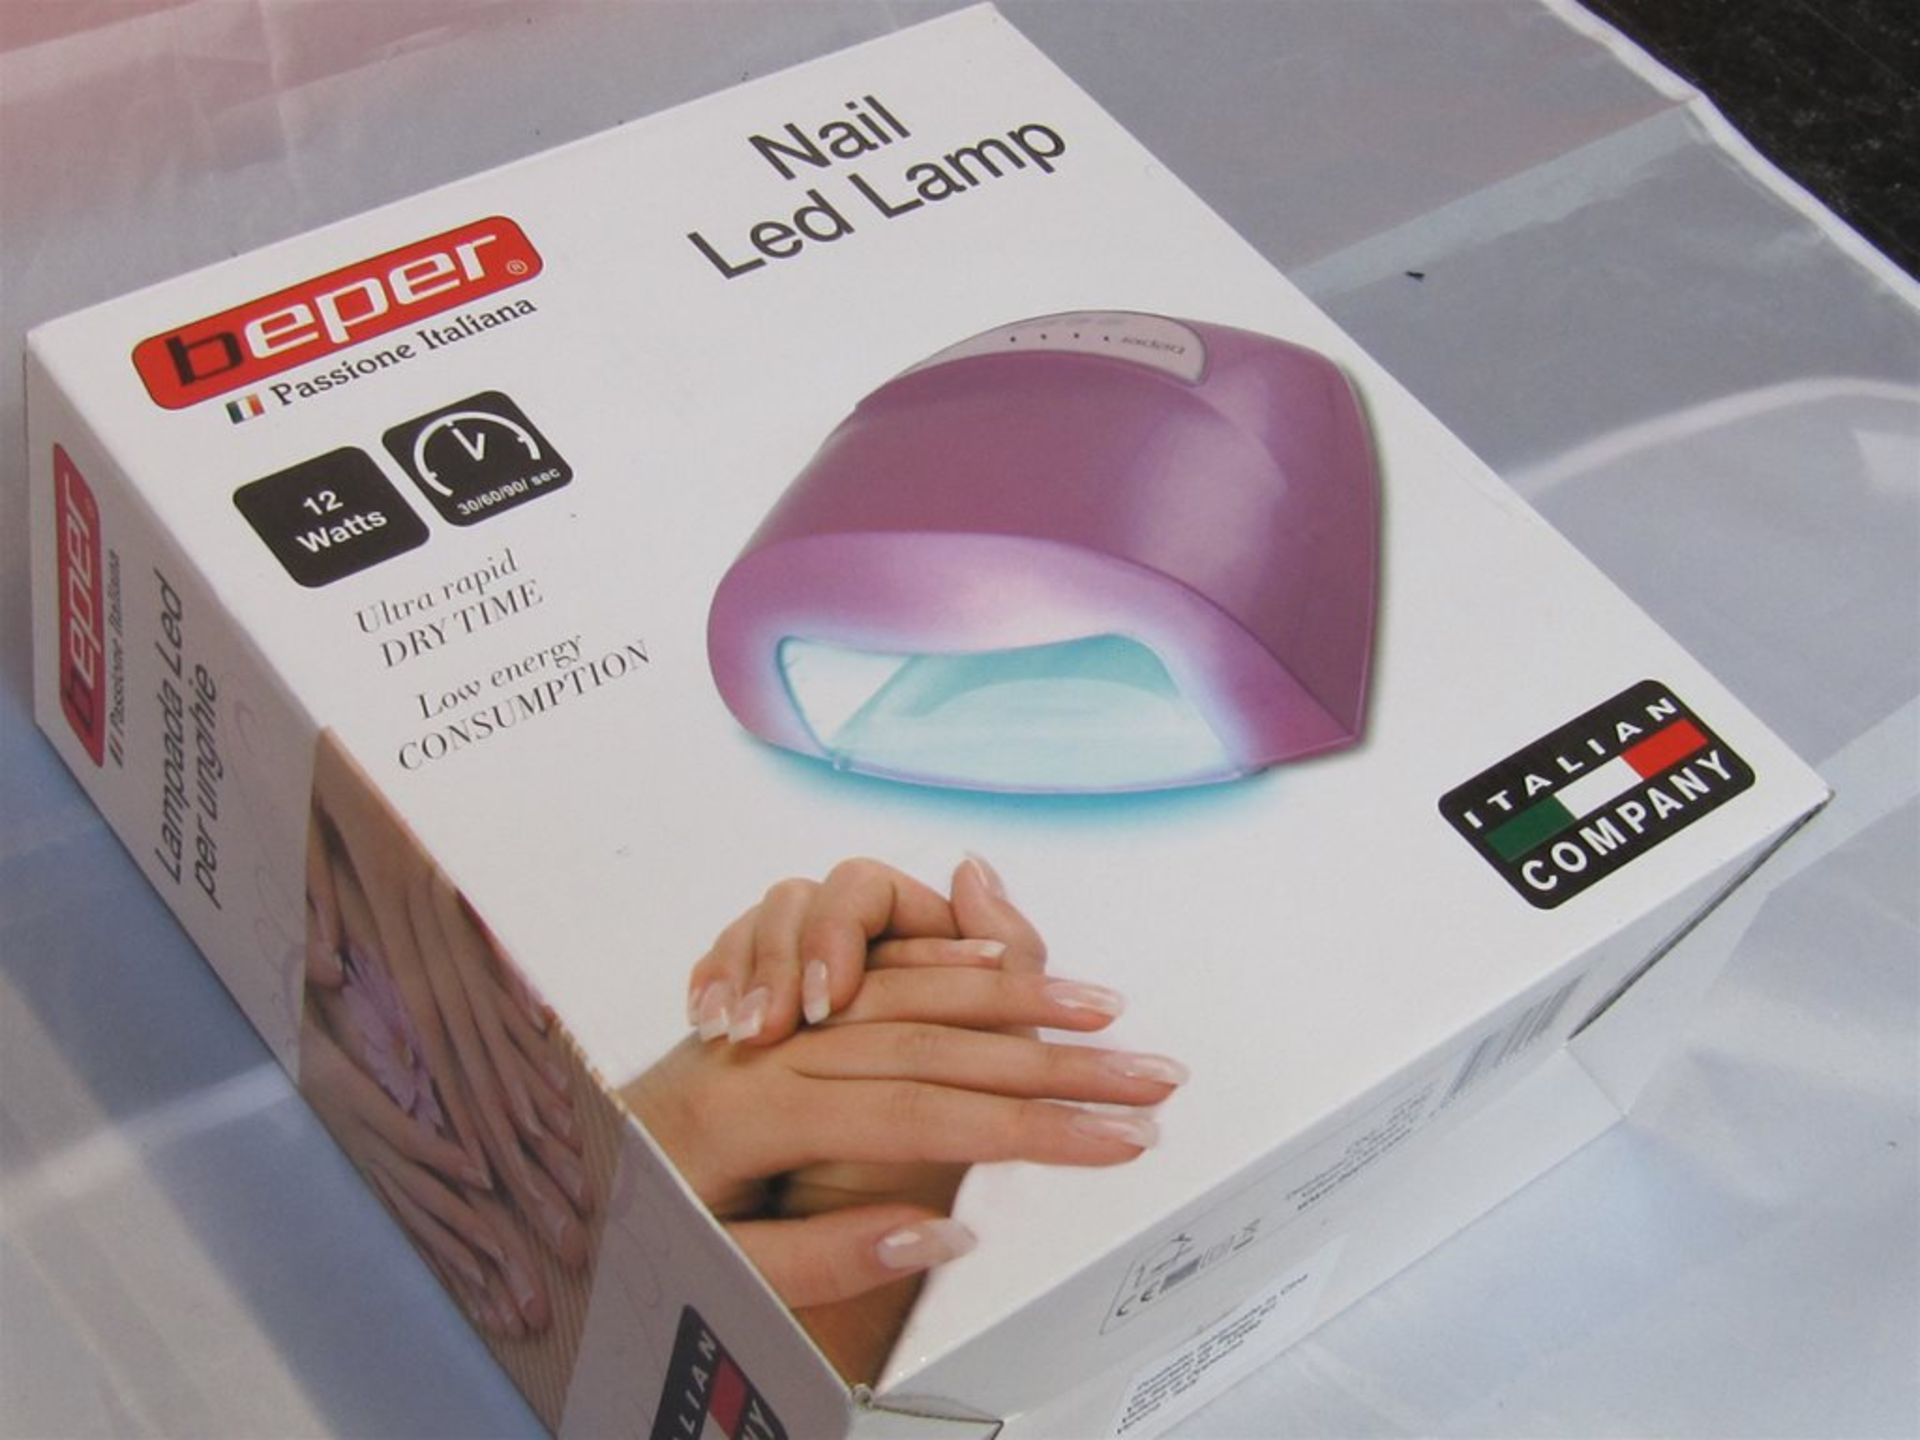 157) Beper LED Nail Lamp. 12w Rapid Dry Time. No vat on Hammer.